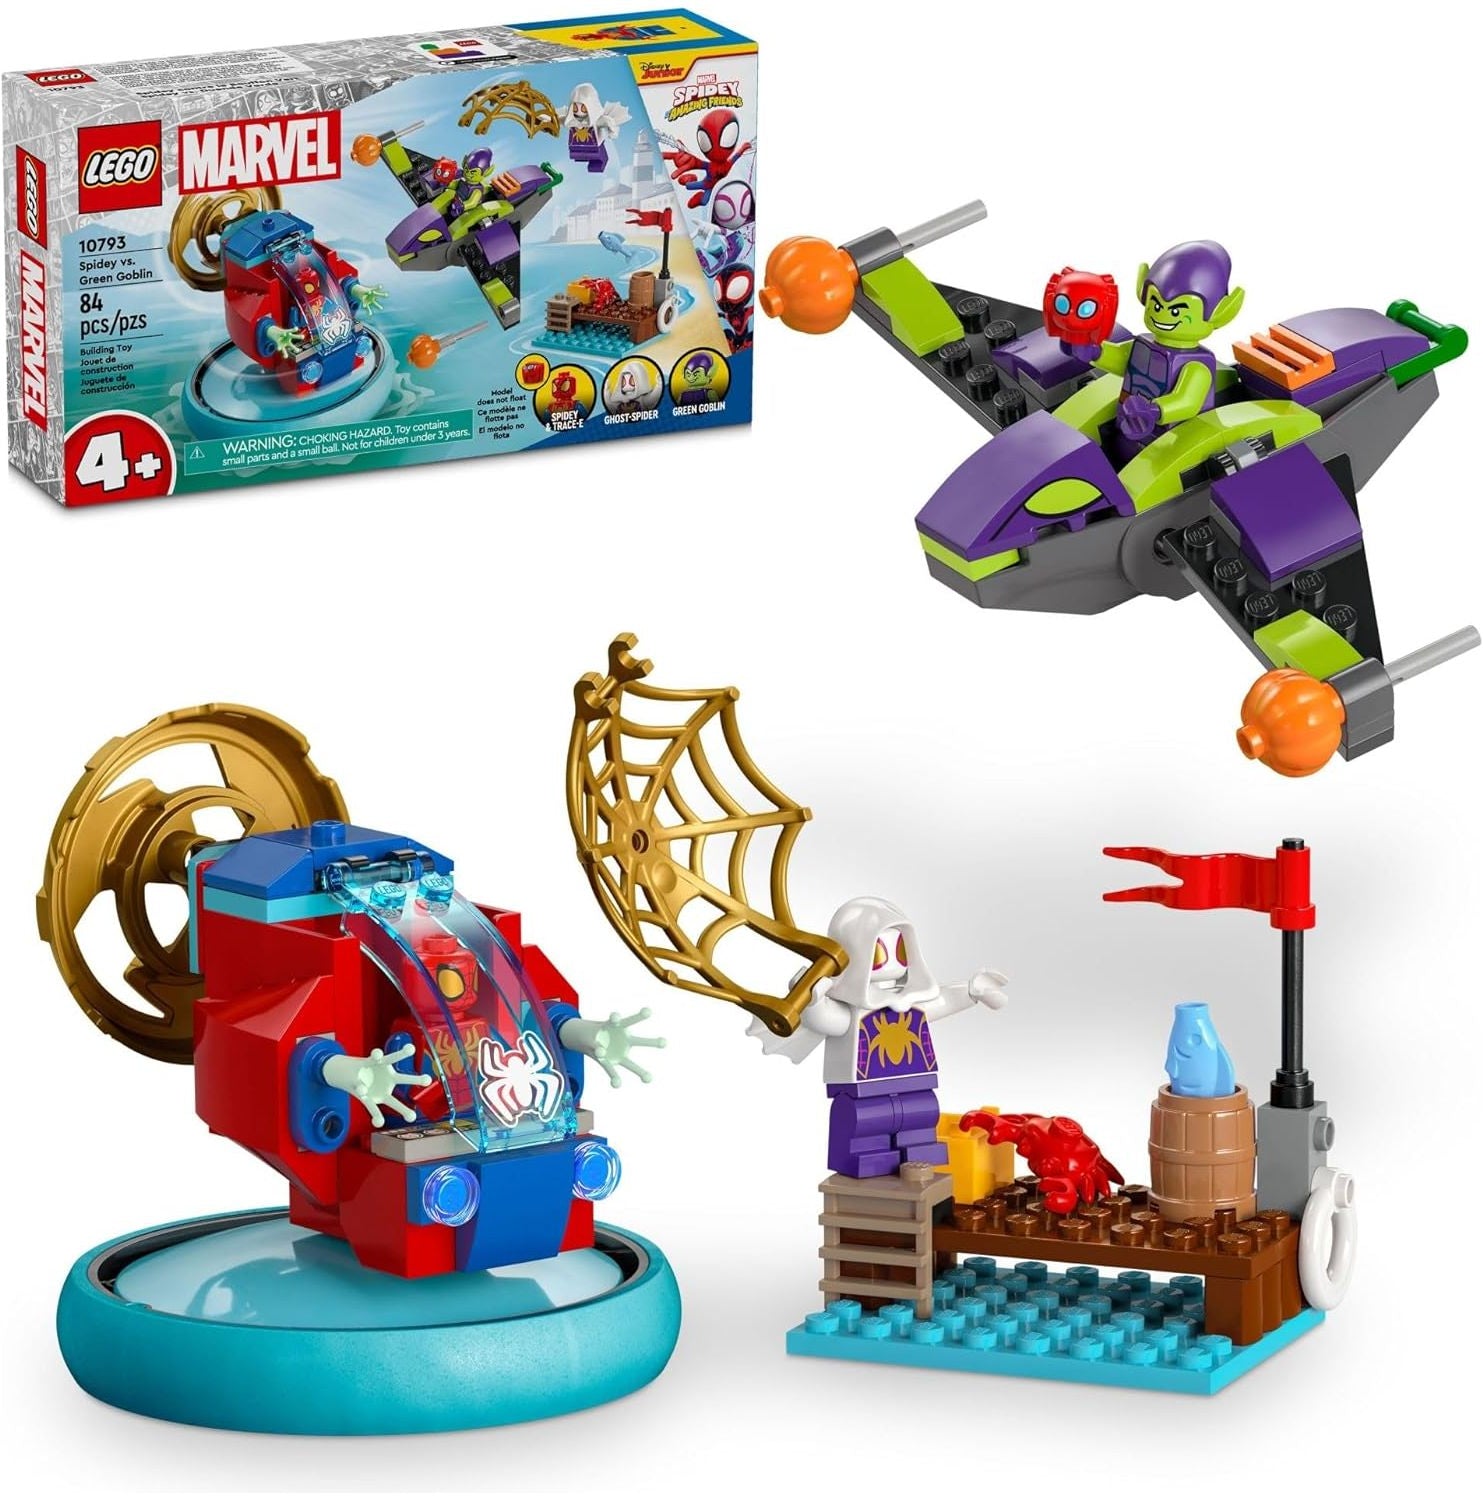 LEGO 10793 Marvel Spidey vs. Green Goblin, Super Hero Toy with Green Goblin Figure, Marvel Toy for Young Super Hero Fans, Spider-Man.